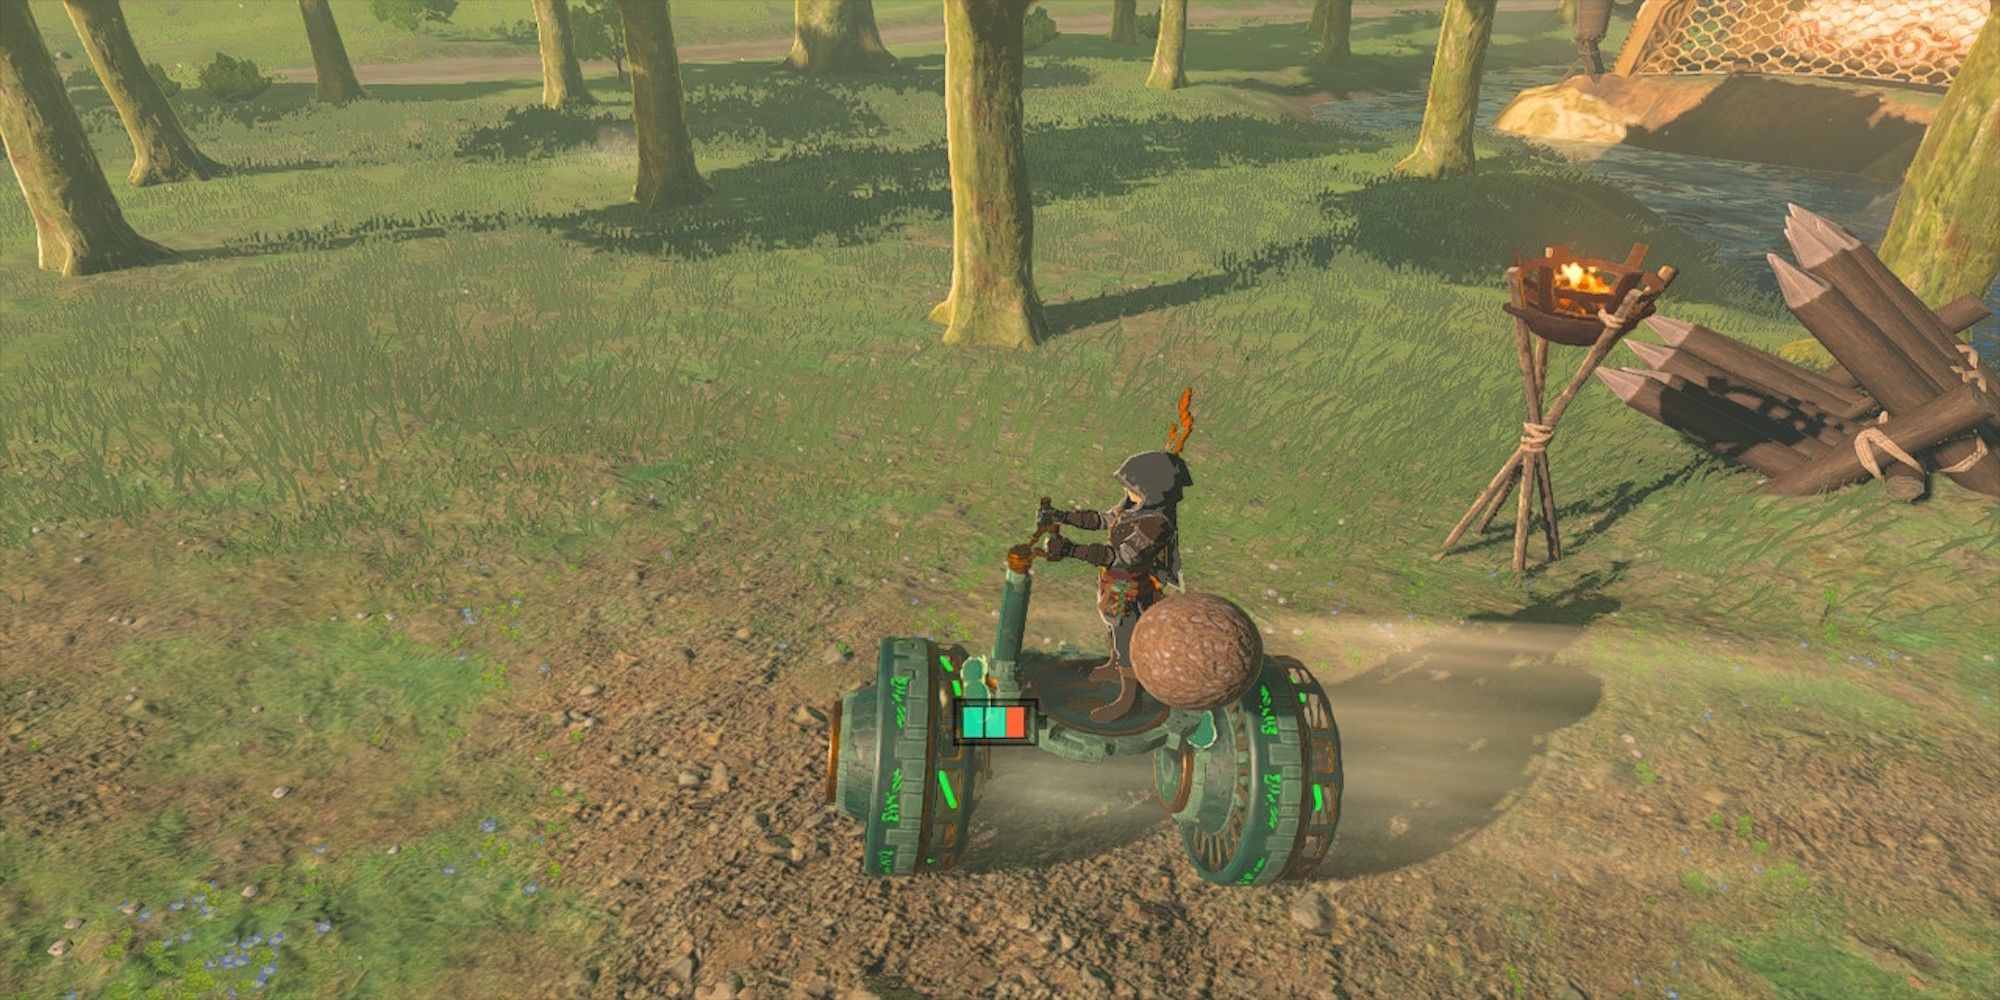 Riding a hover bike in The Legend of Zelda Tears of the Kingdom